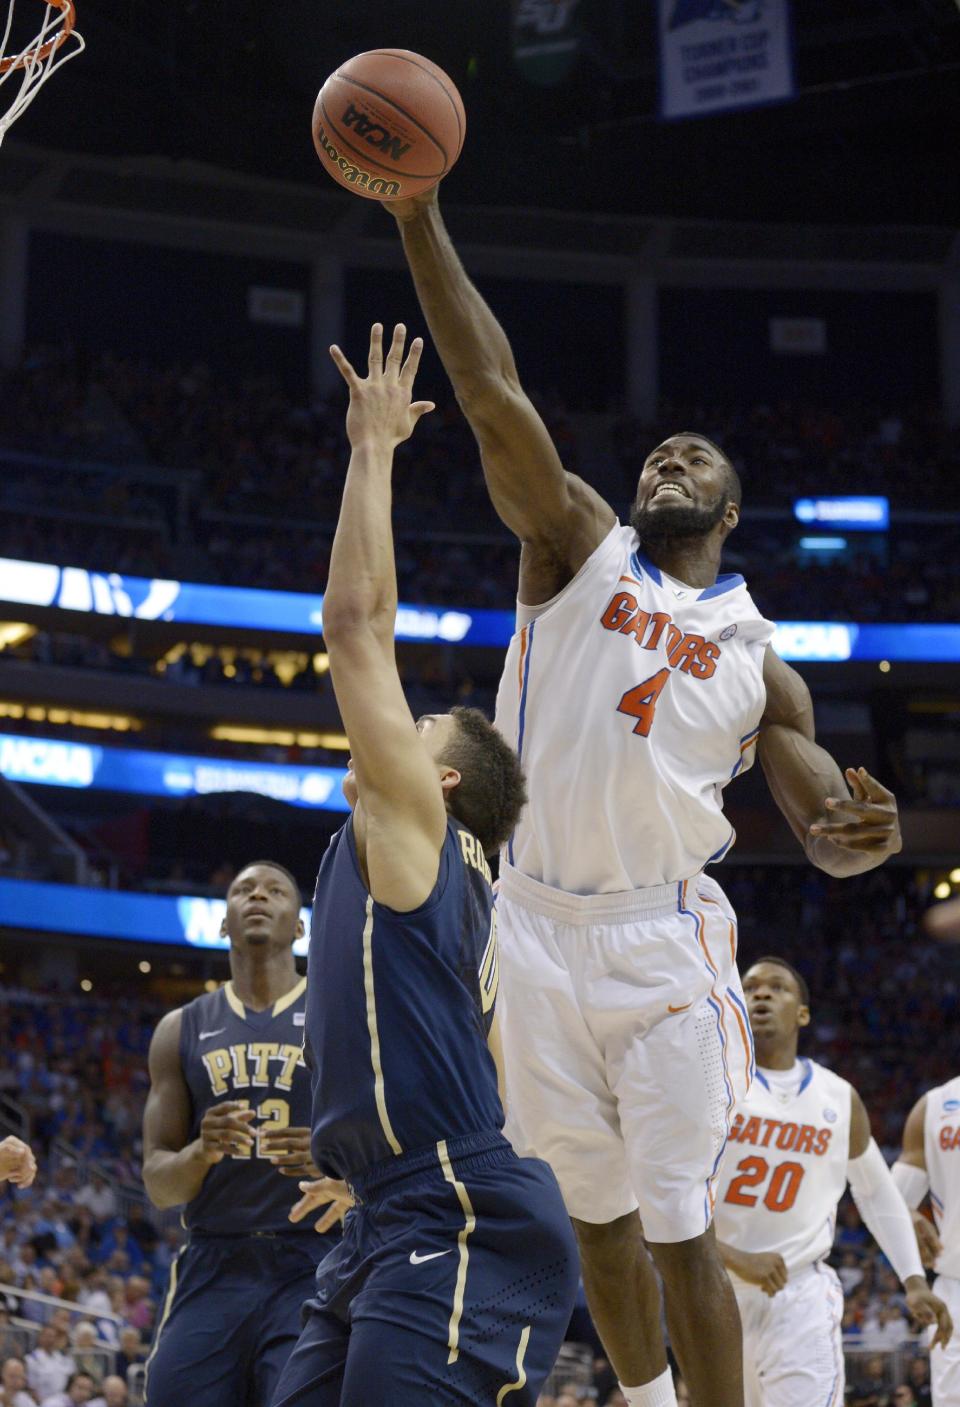 Florida center Patric Young (4) blocks a shot by Pittsburgh guard James Robinson (0) during the second half in a third-round game in the NCAA college basketball tournament Saturday, March 22, 2014, in Orlando, Fla. (AP Photo/Phelan M. Ebenhack)